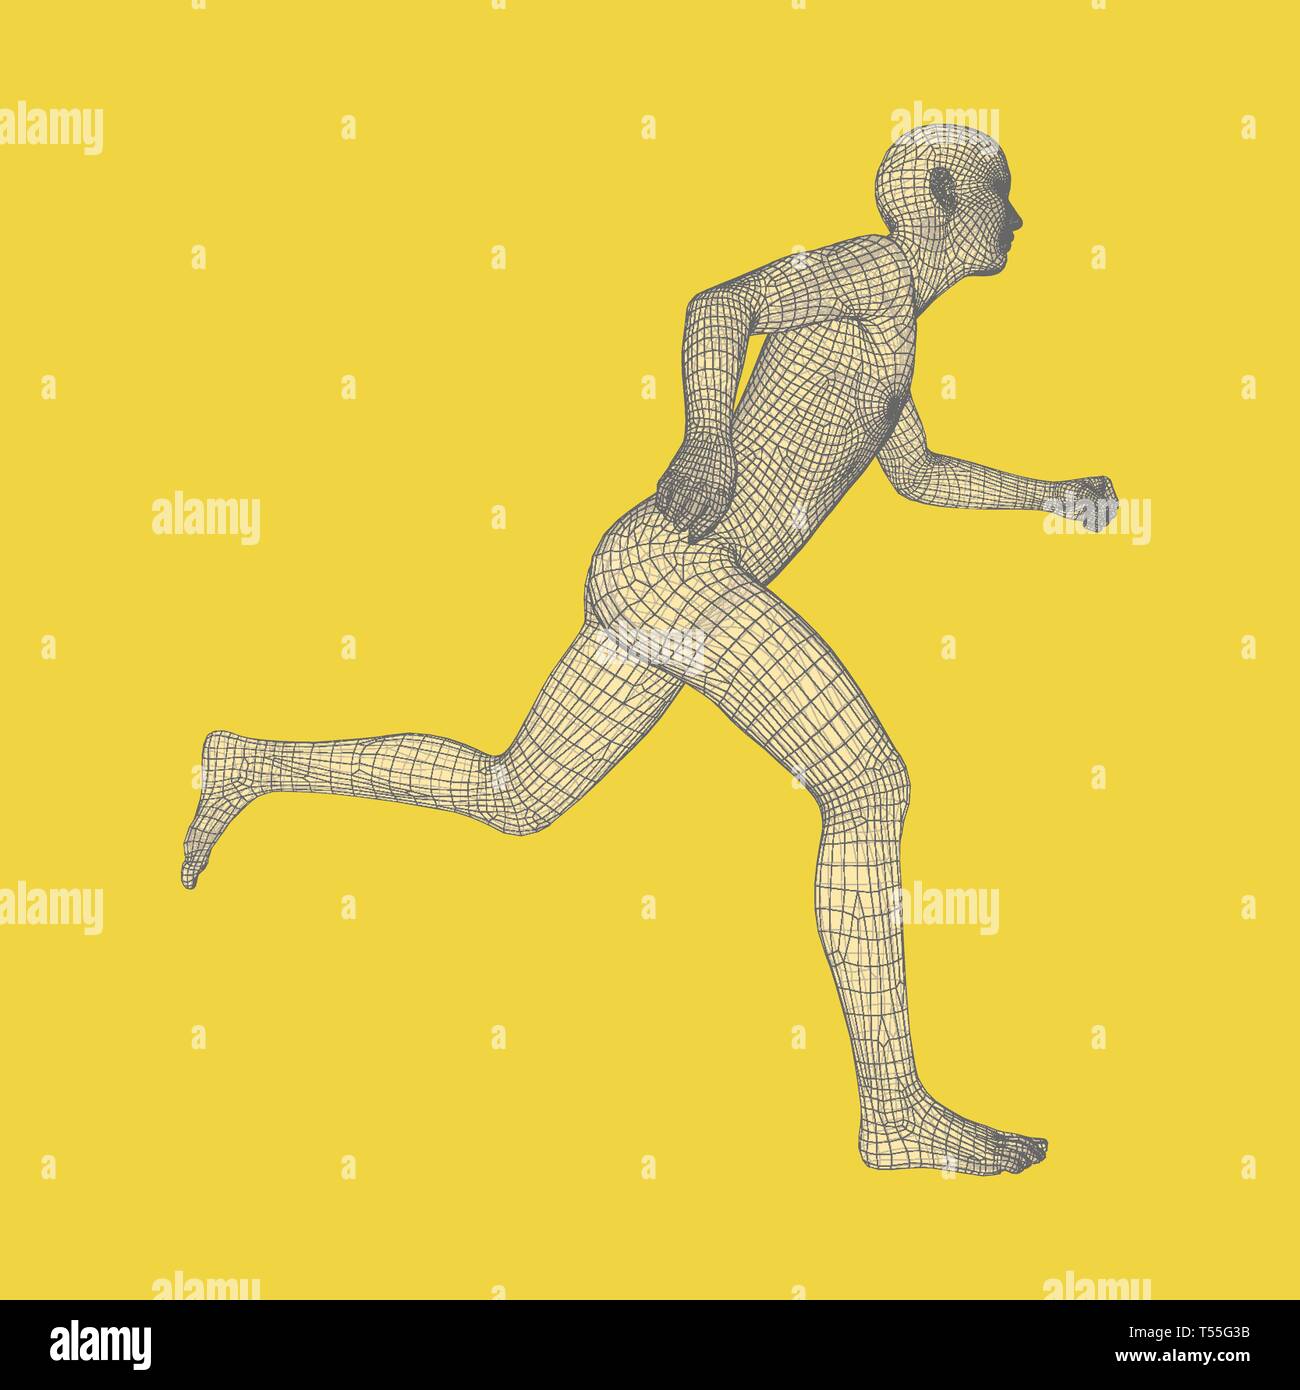 3d Running Man. Human Body Wire Model. Sport Symbol. Low-poly Man in Motion. Vector Geometric Illustration. Stock Vector